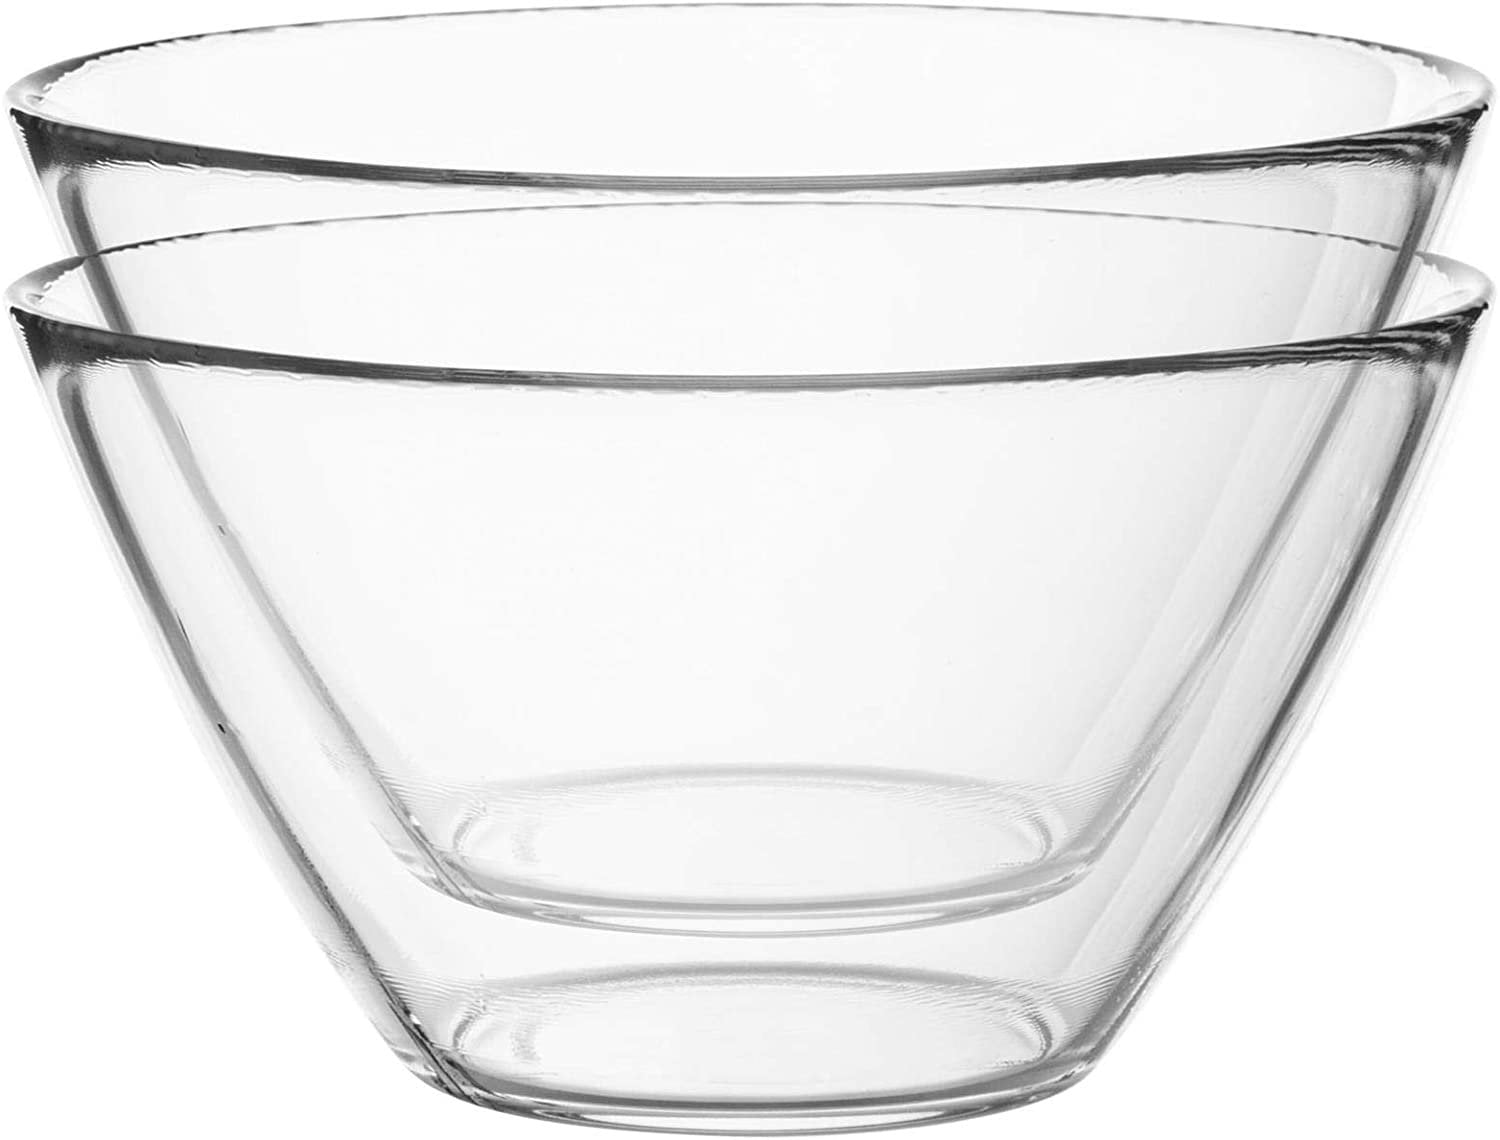 Luminarc Cosmos Tempered Clear Glass Mixing Bowls Kitchen Food Microwave Safe 